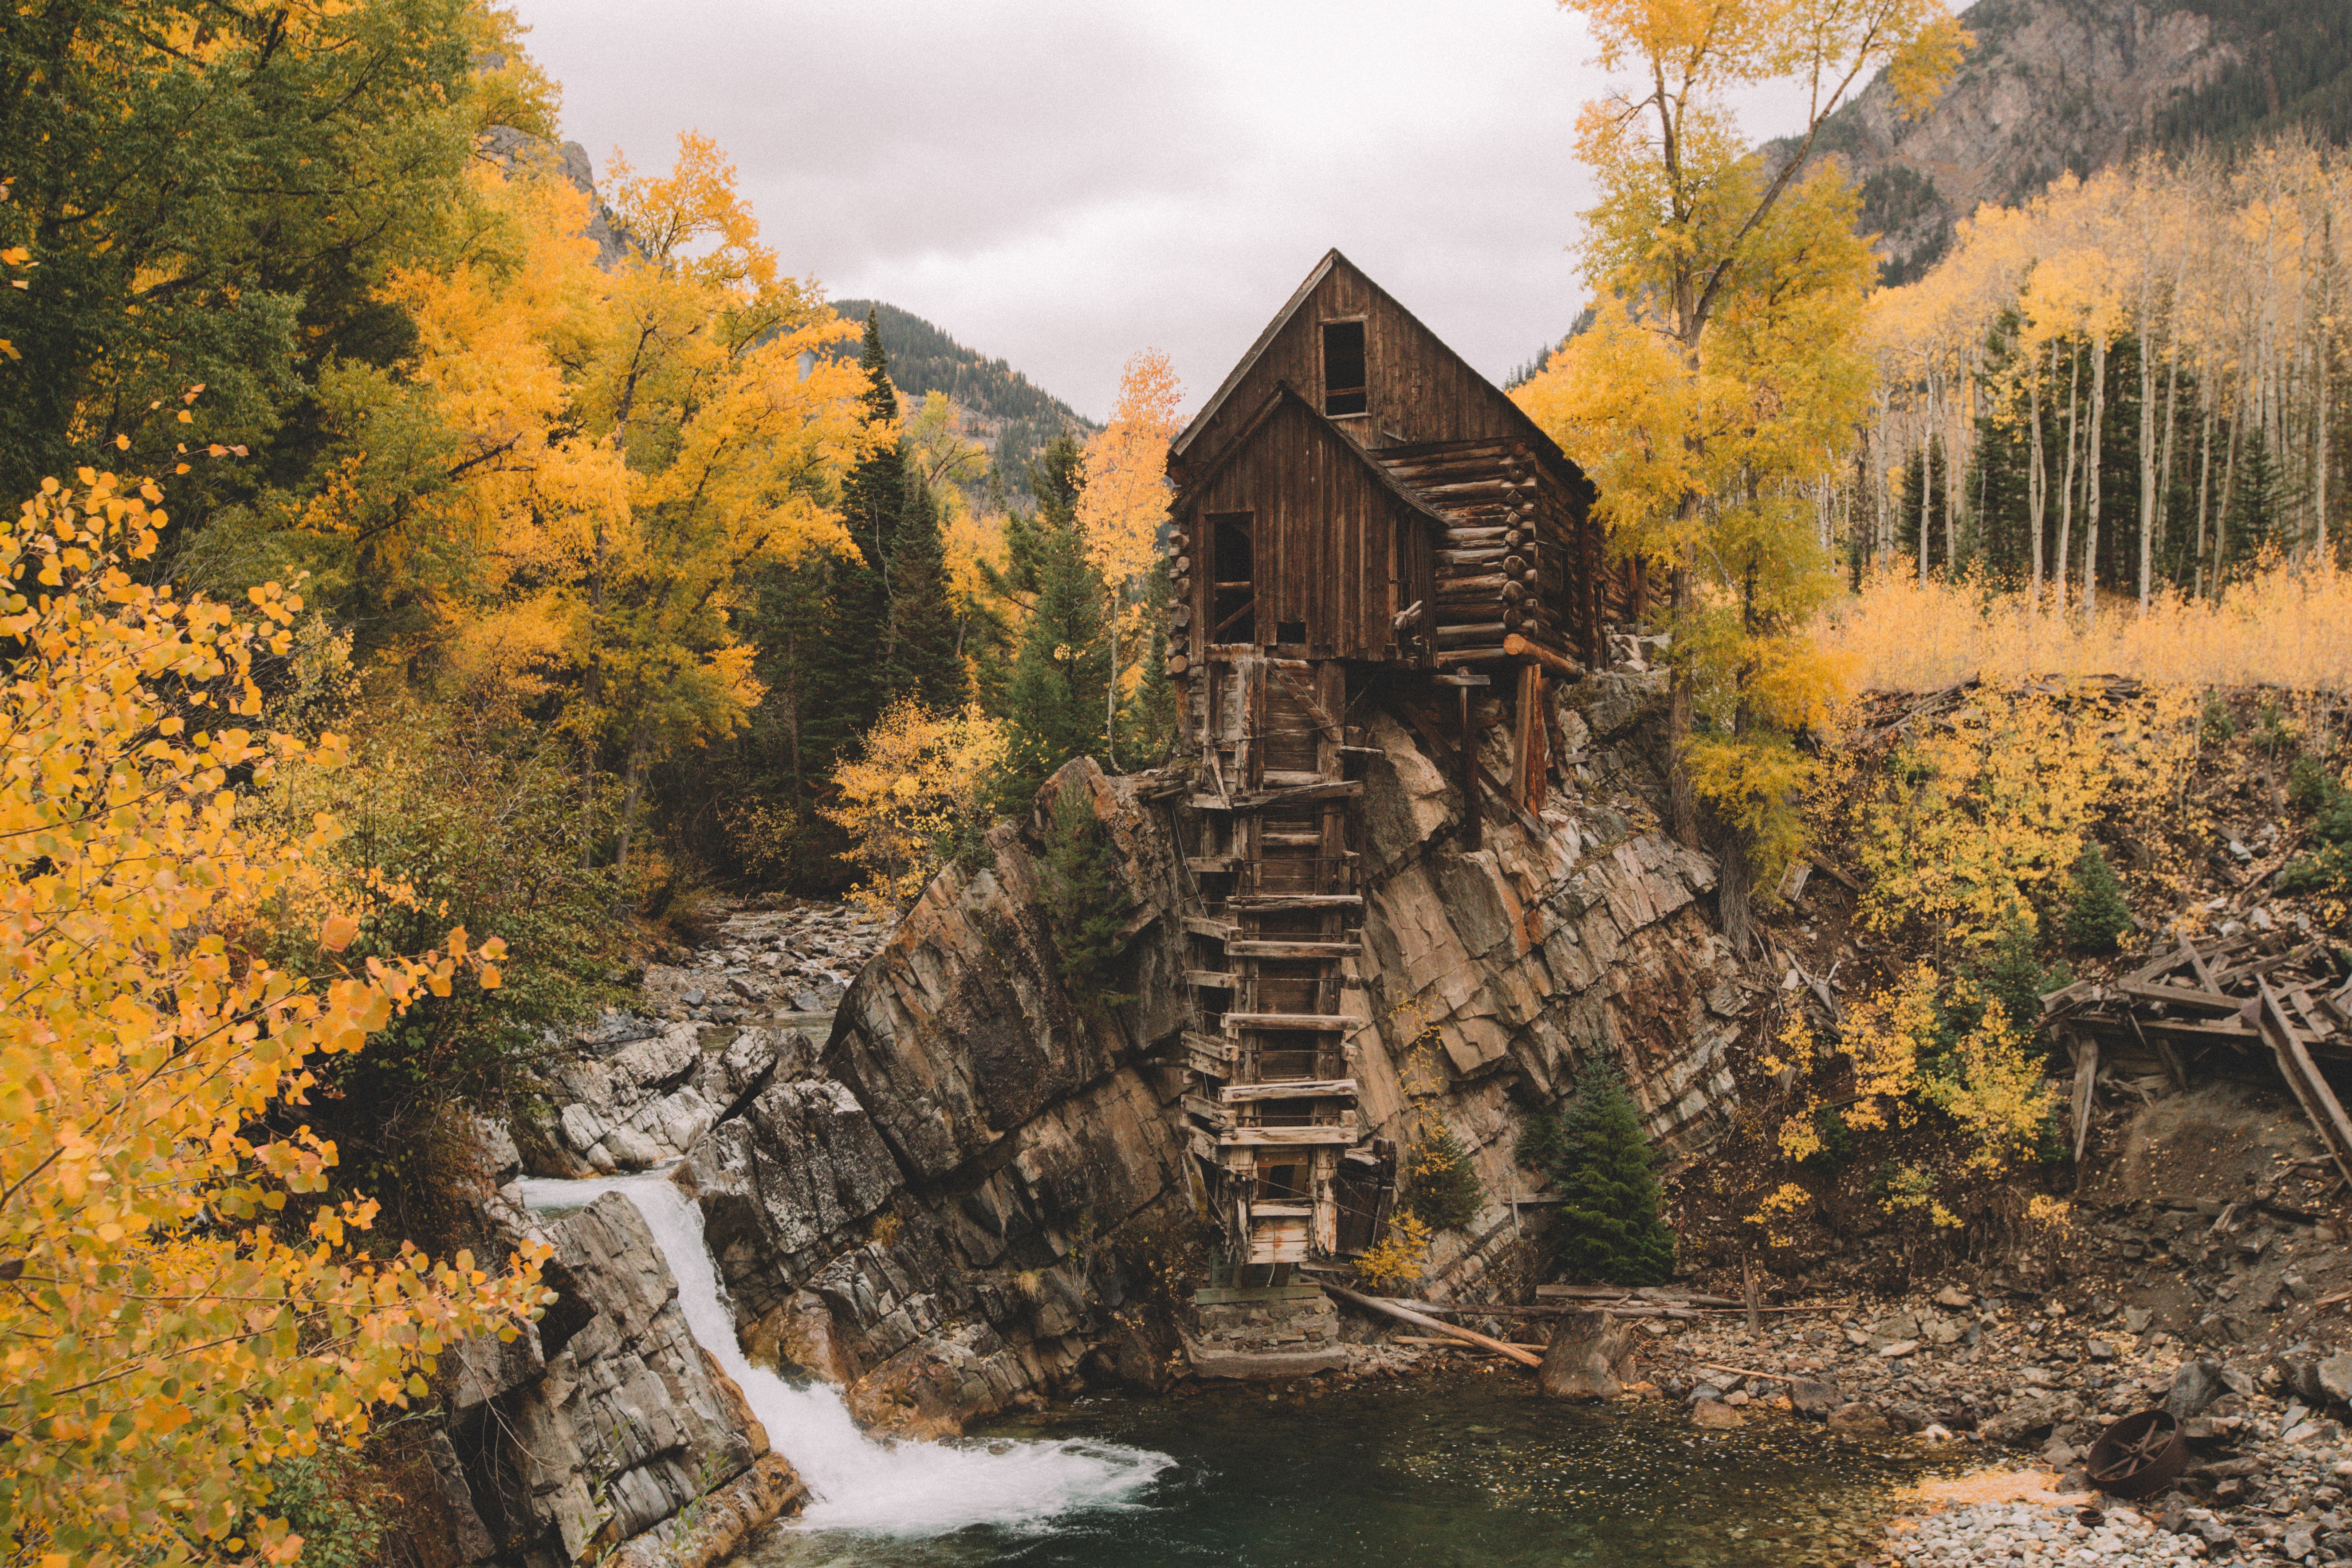 nature, rivers, rock, wood, wooden, small house, lodge